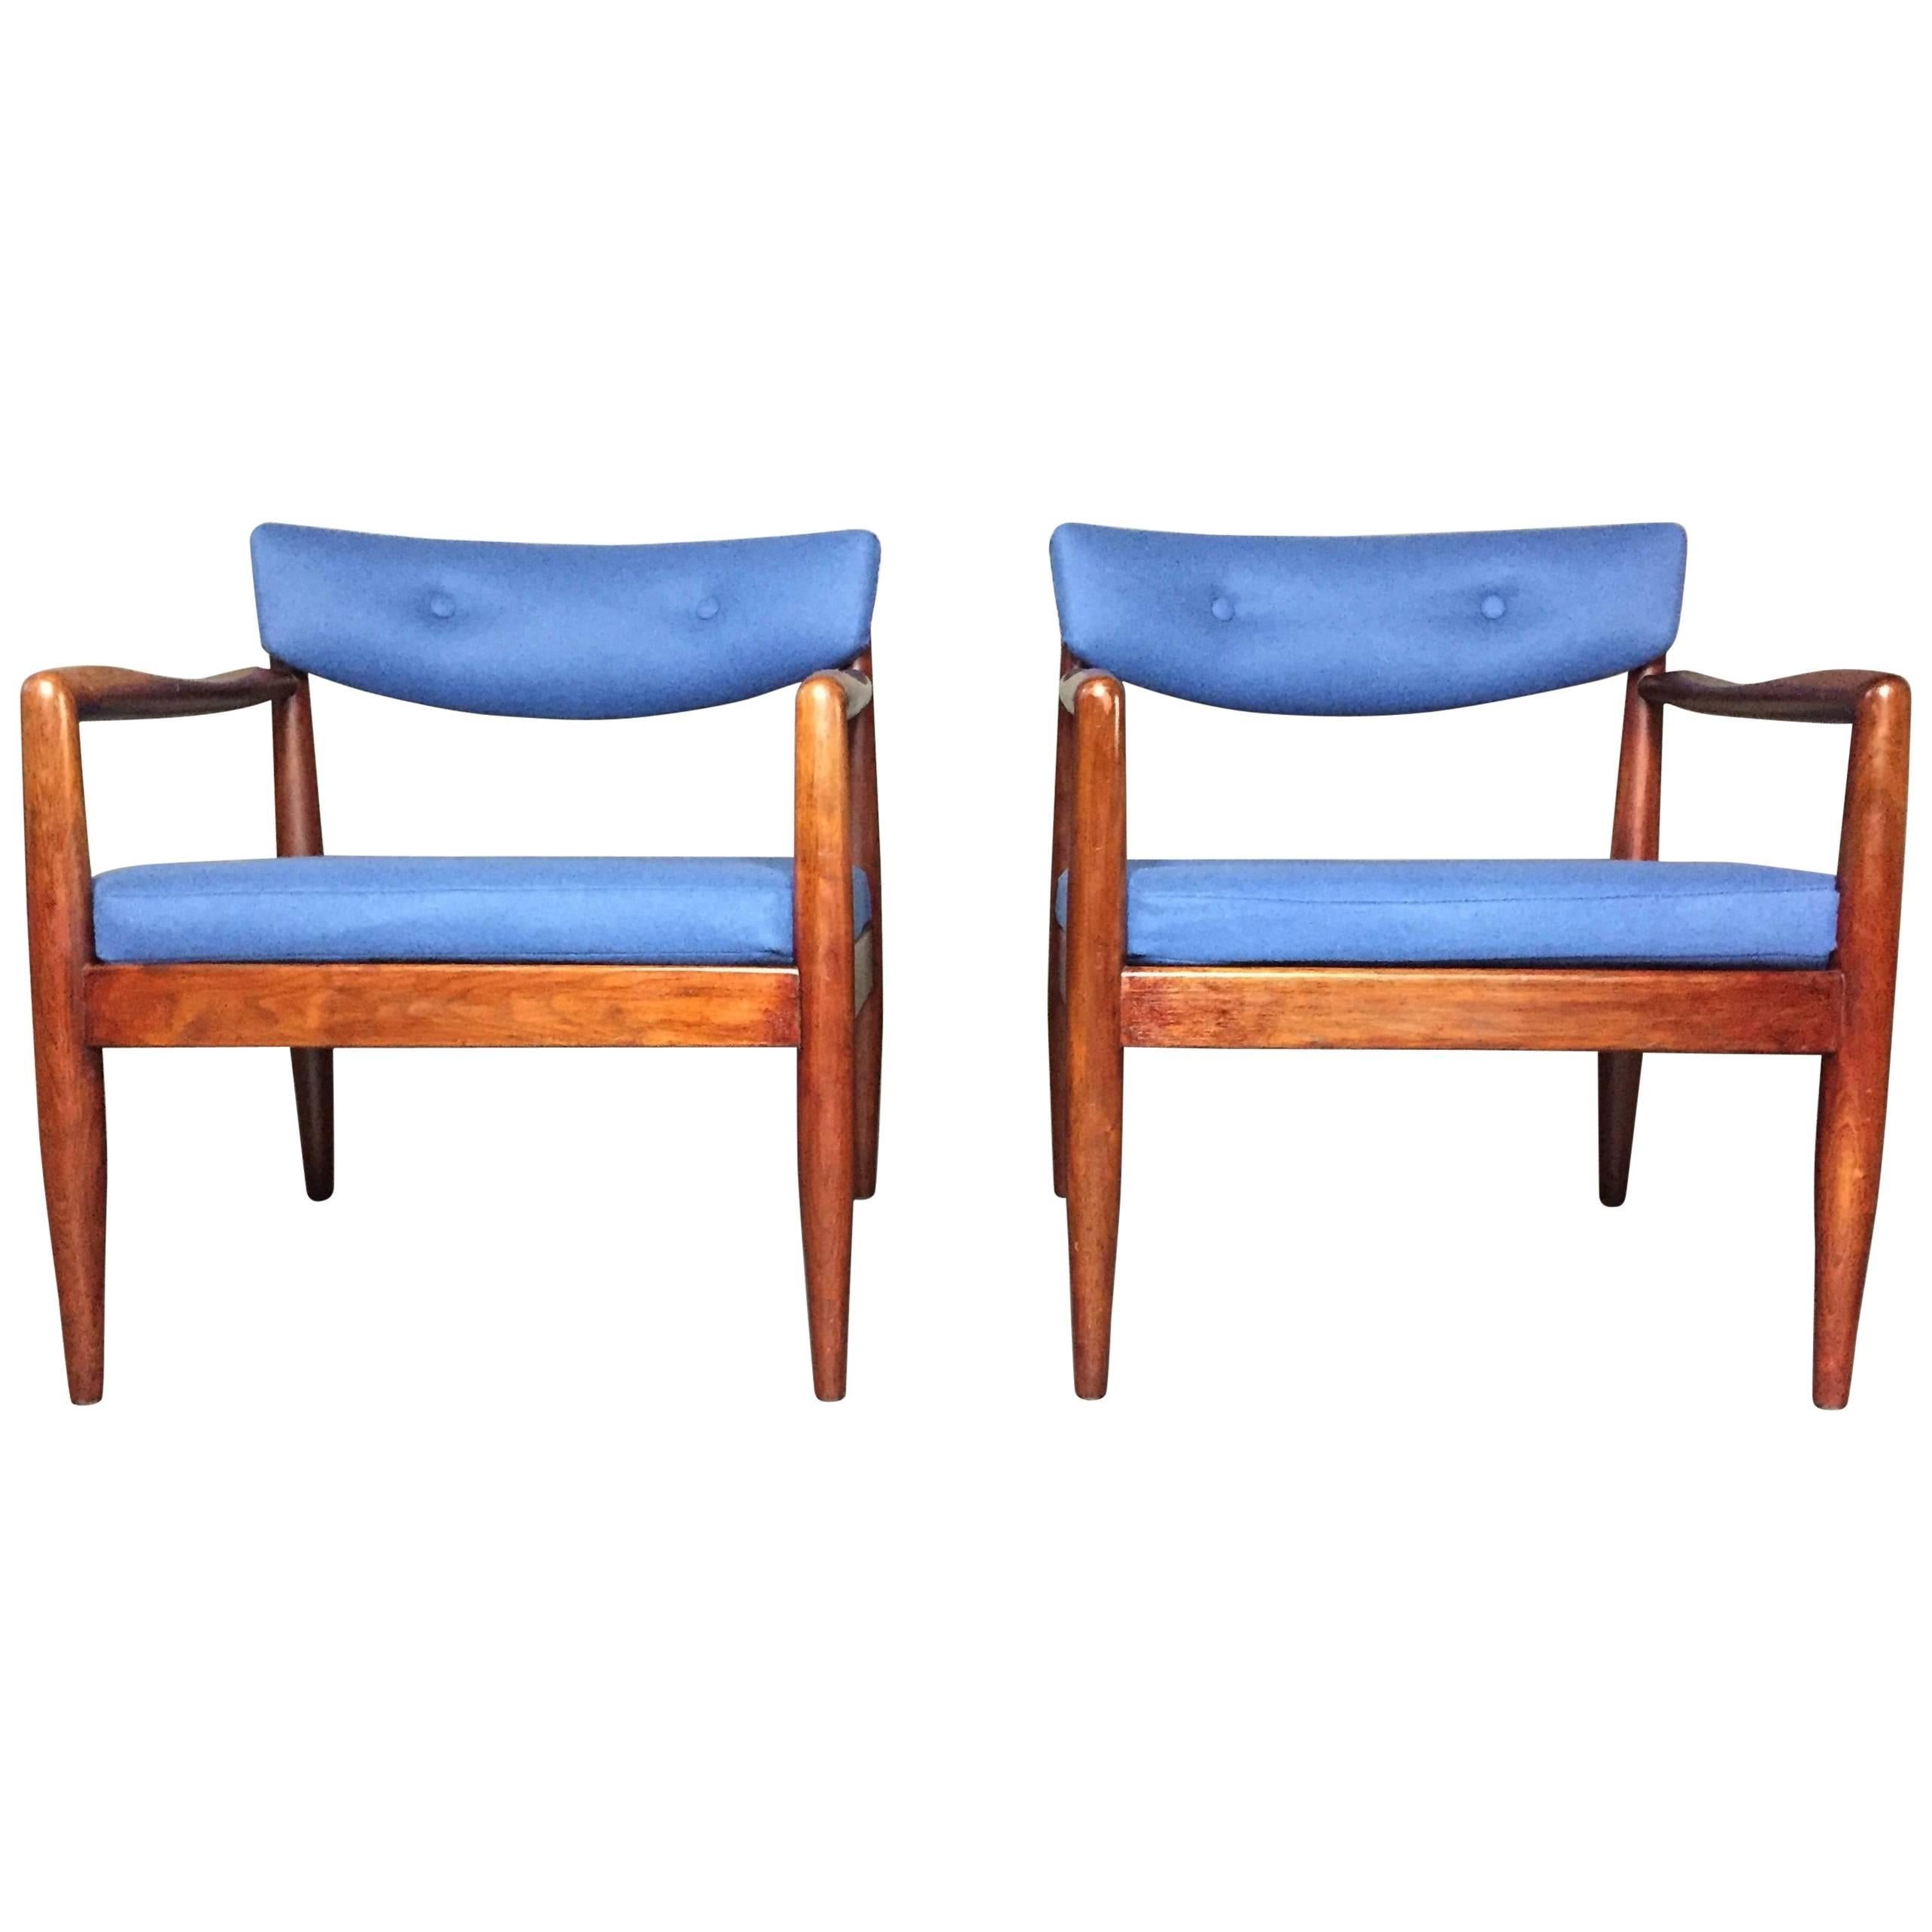 Pair of Adrian Pearsall Upholstered Lounge Chairs, USA, 1960s